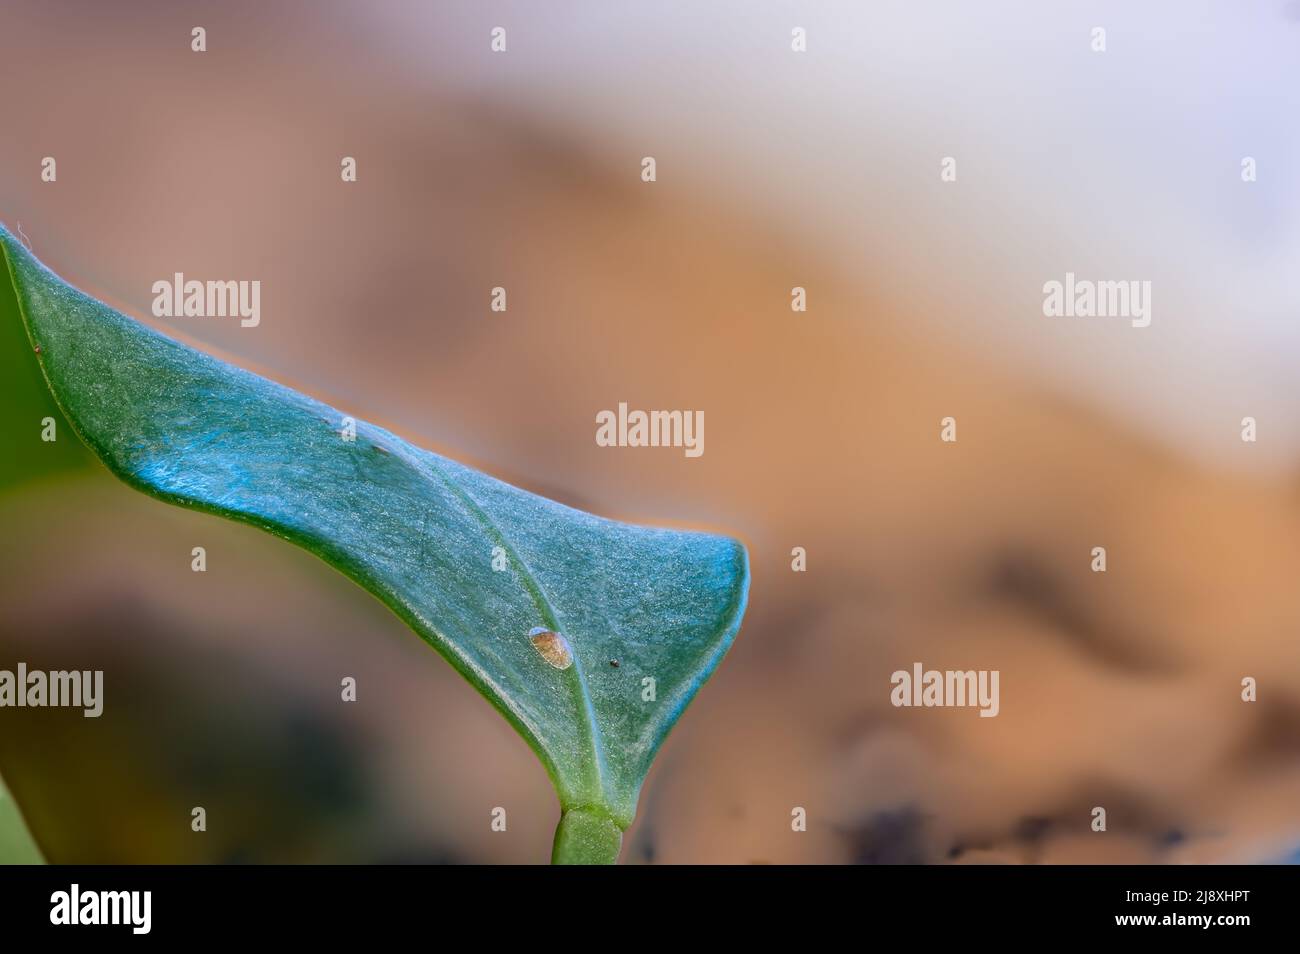 Focus on a single pest scale insect on an indoor houseplant leaf. Stock Photo